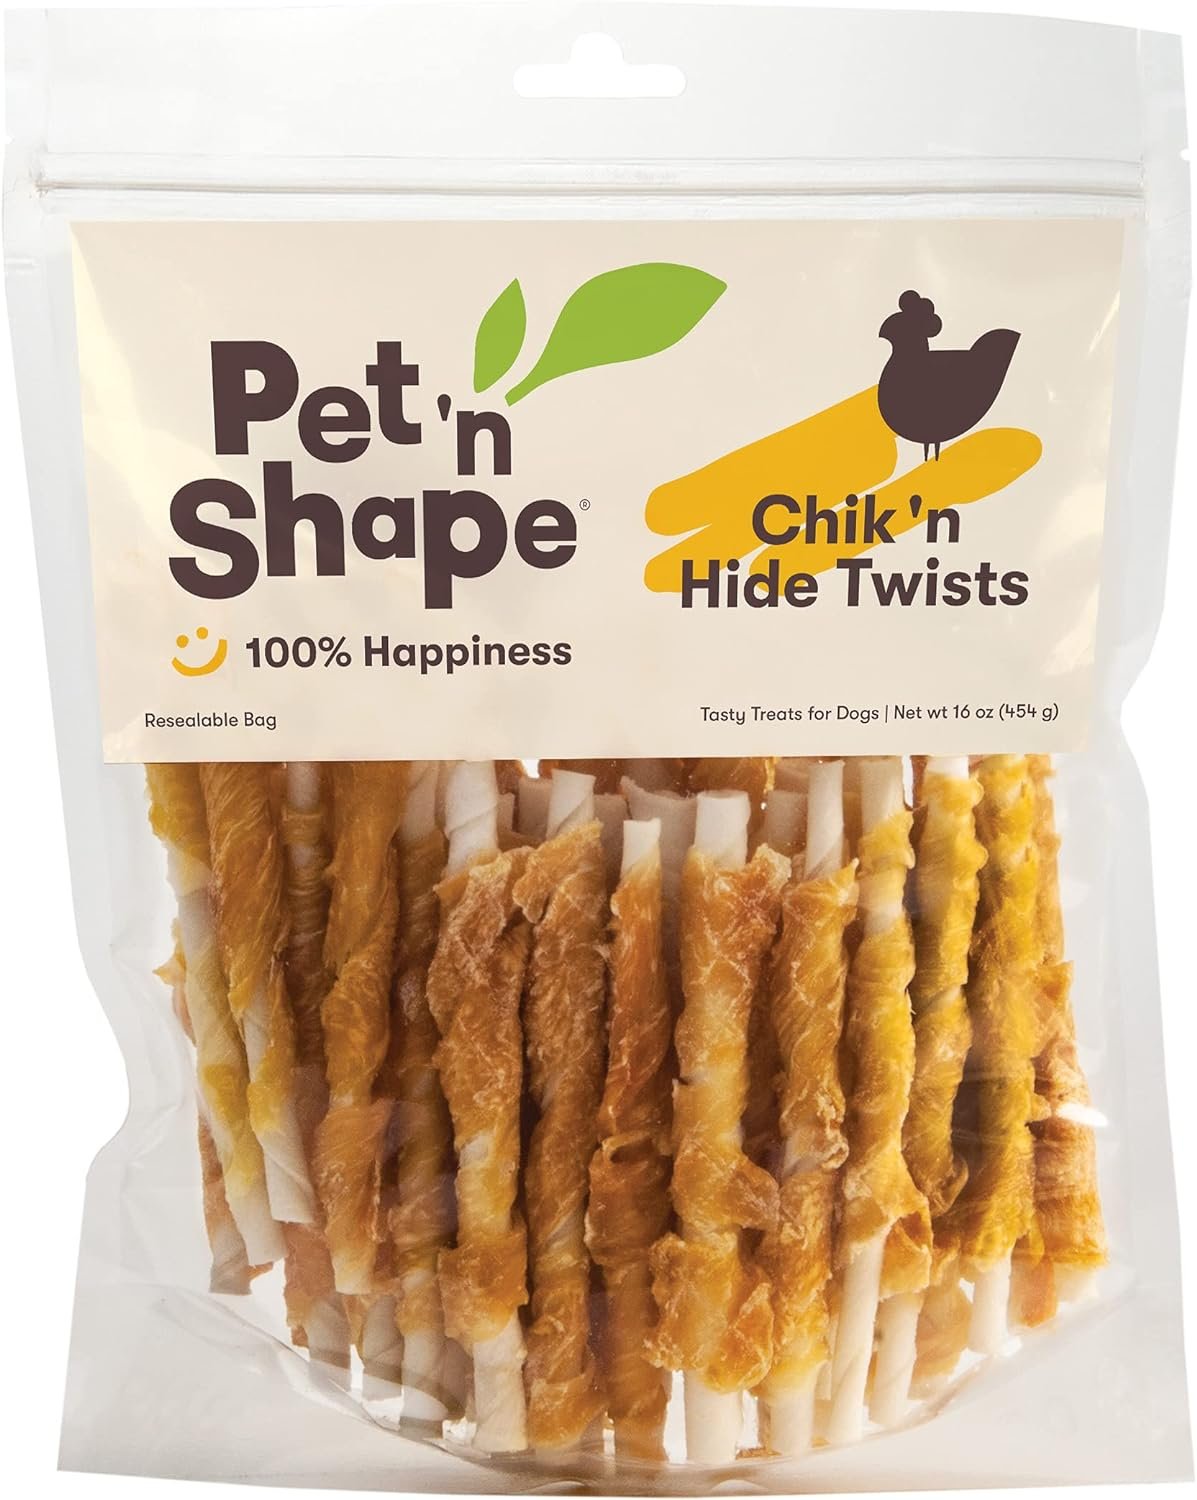 Pet n Shape Chik n Hide Twists – Chicken Wrapped Rawhide Natural Dog Treats, Small, 16 oz